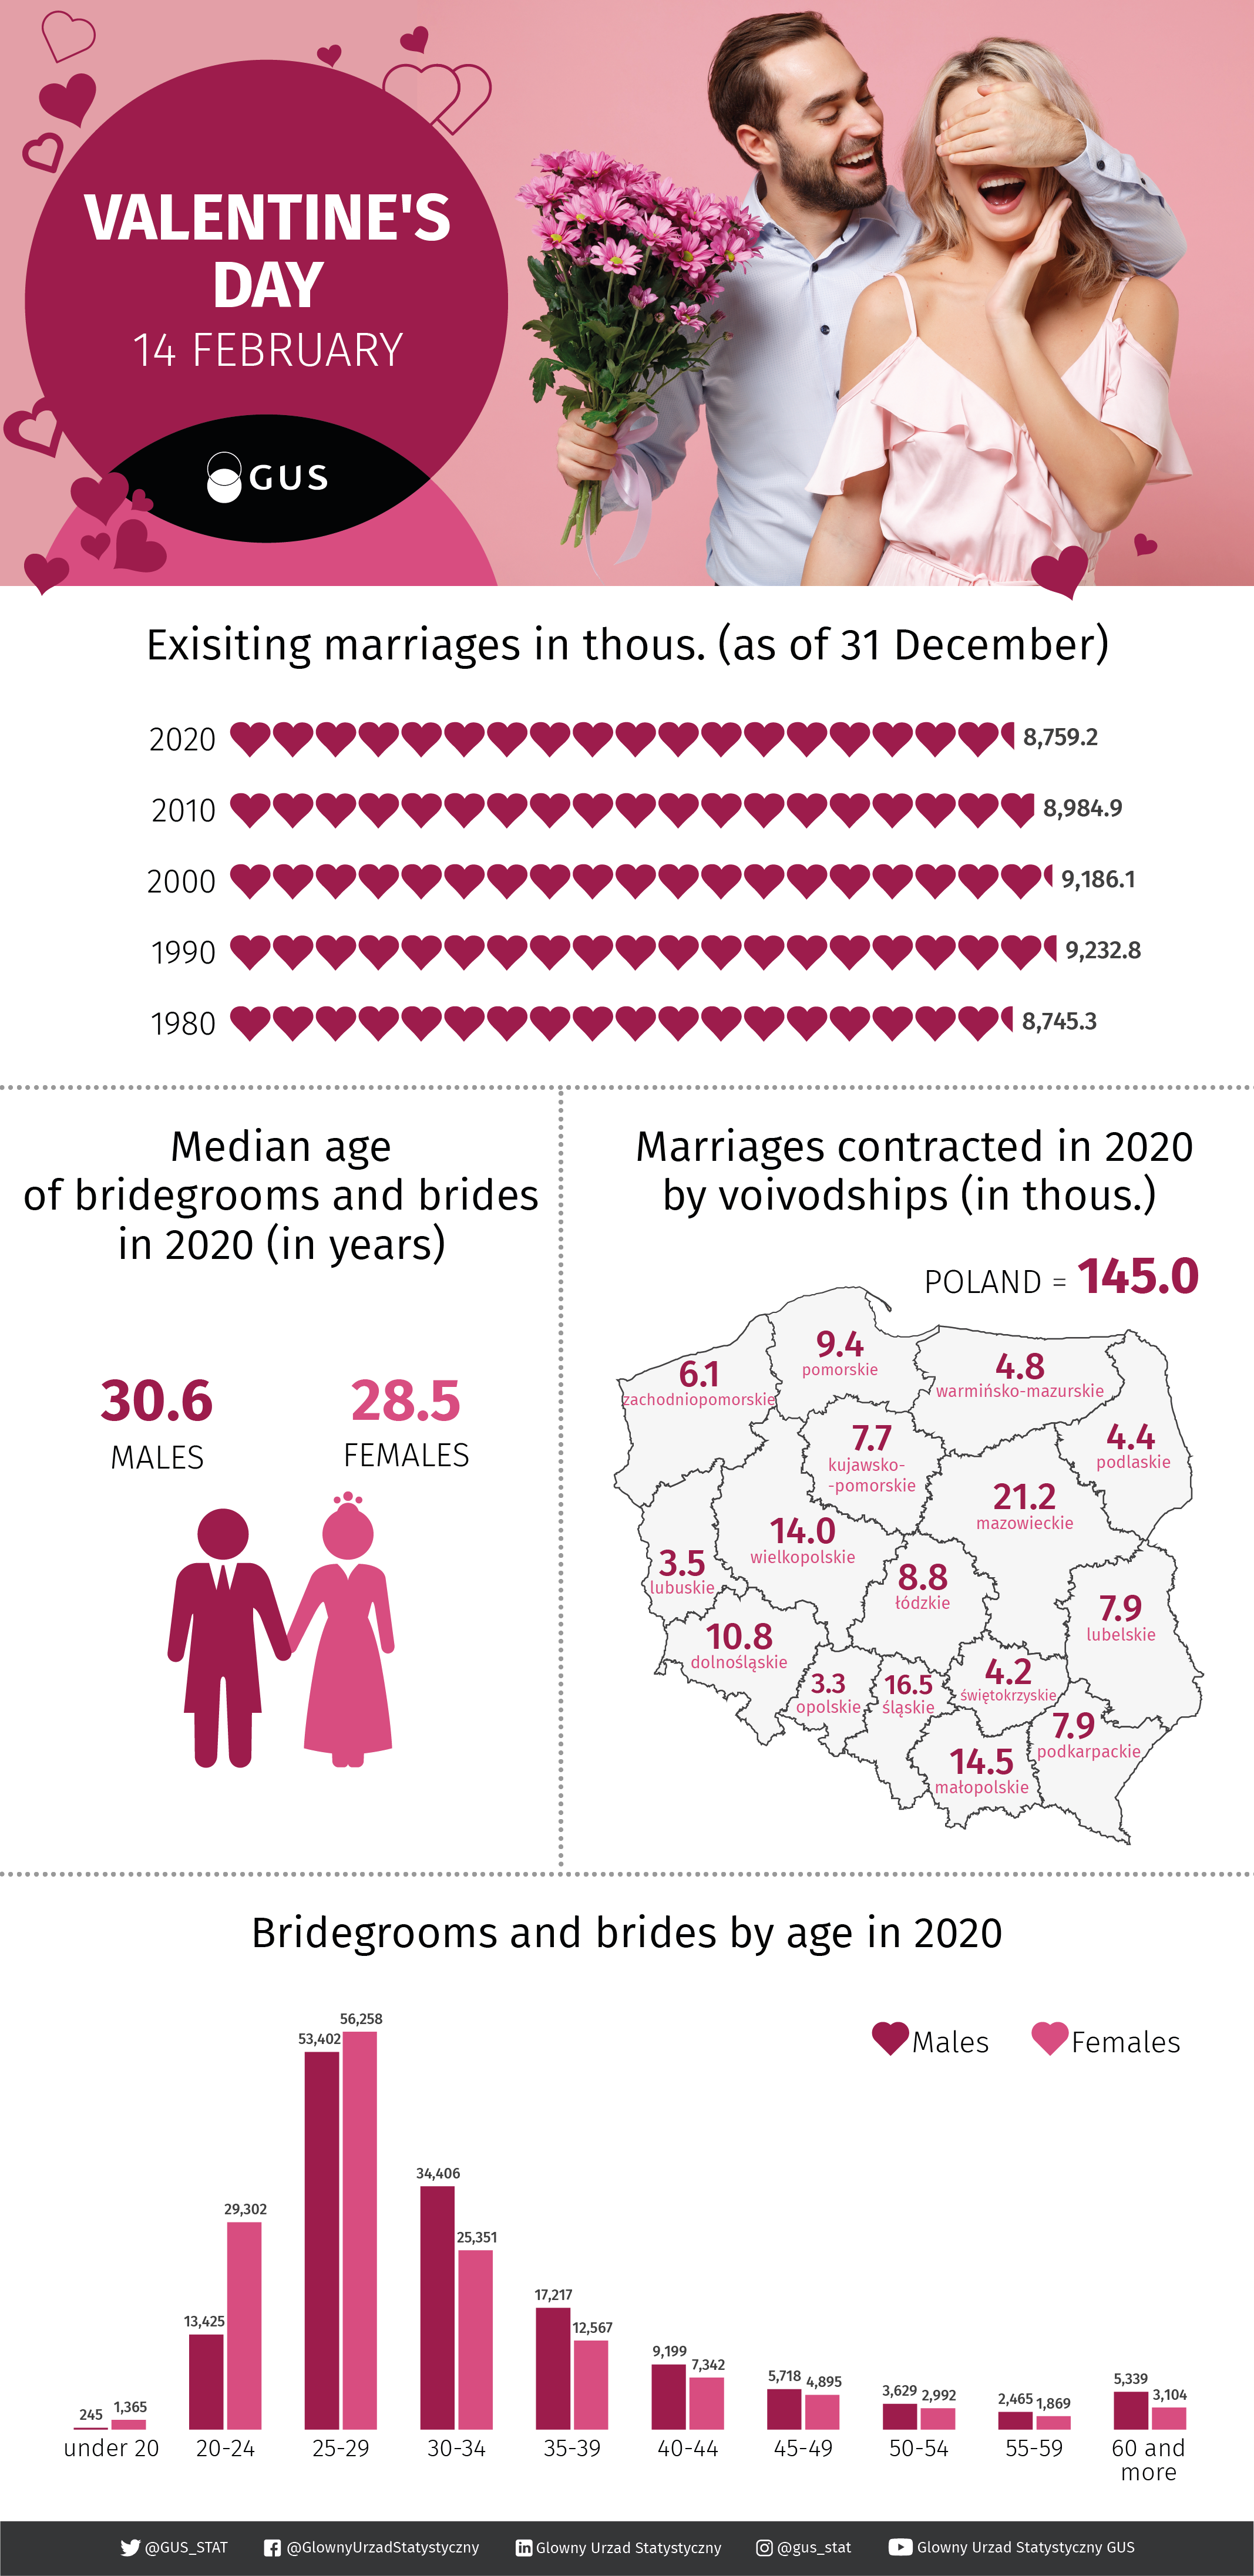 Infographics - Valentine's Day. Data for the infographic can be found in the Excel file attached below